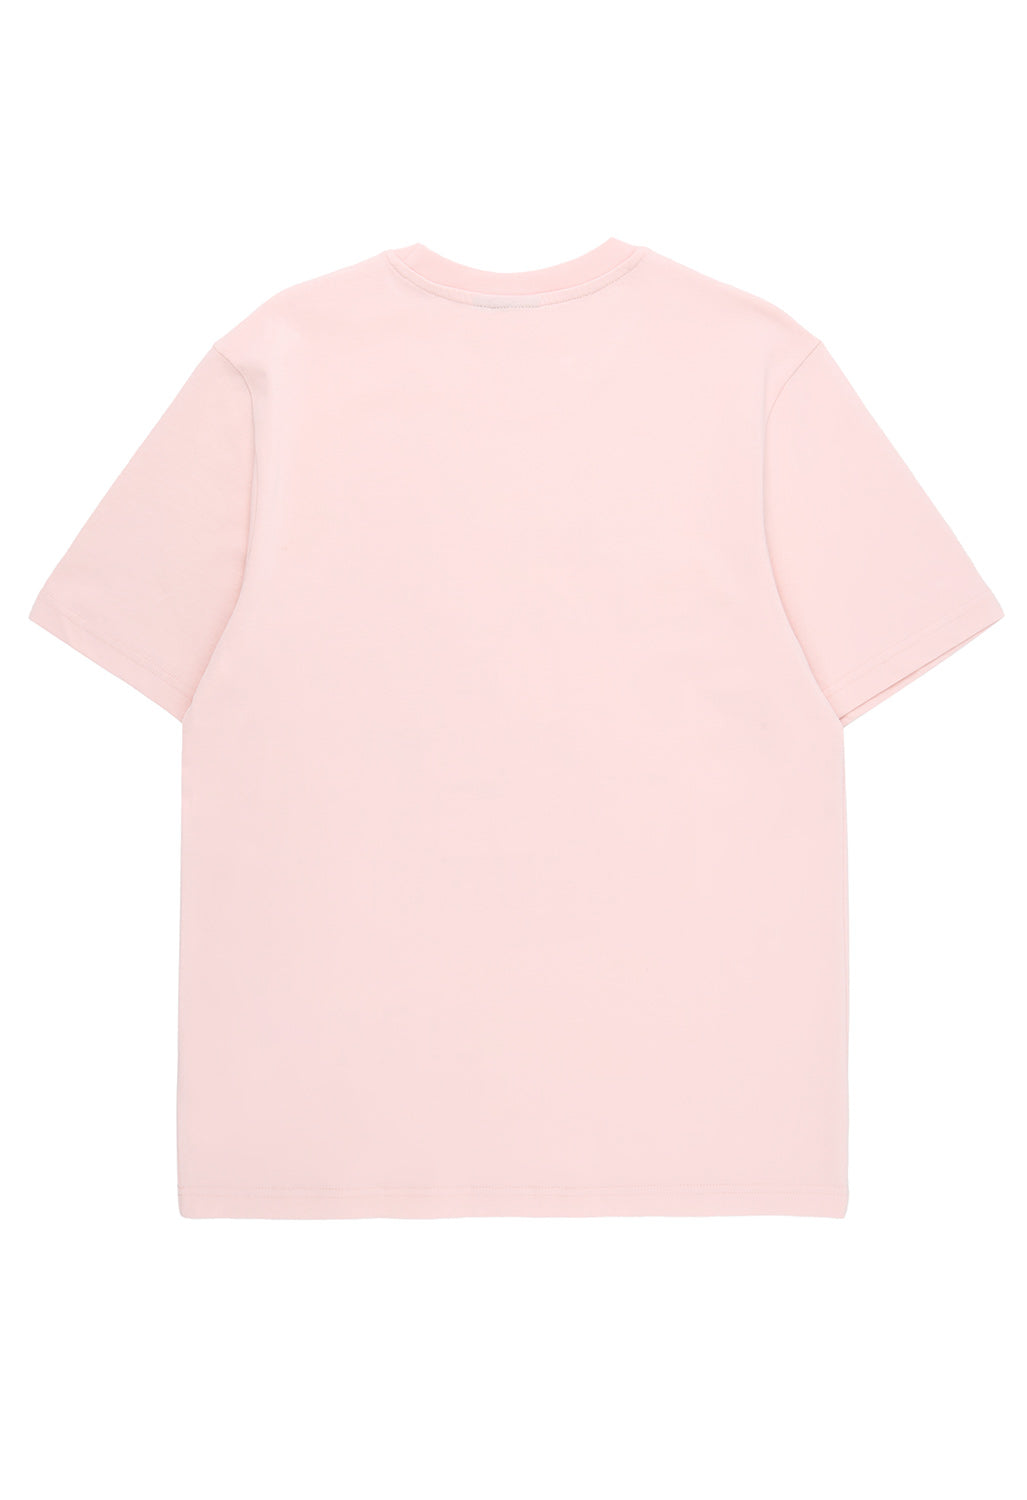 Stan Ray Men's Each One Tee - Pink